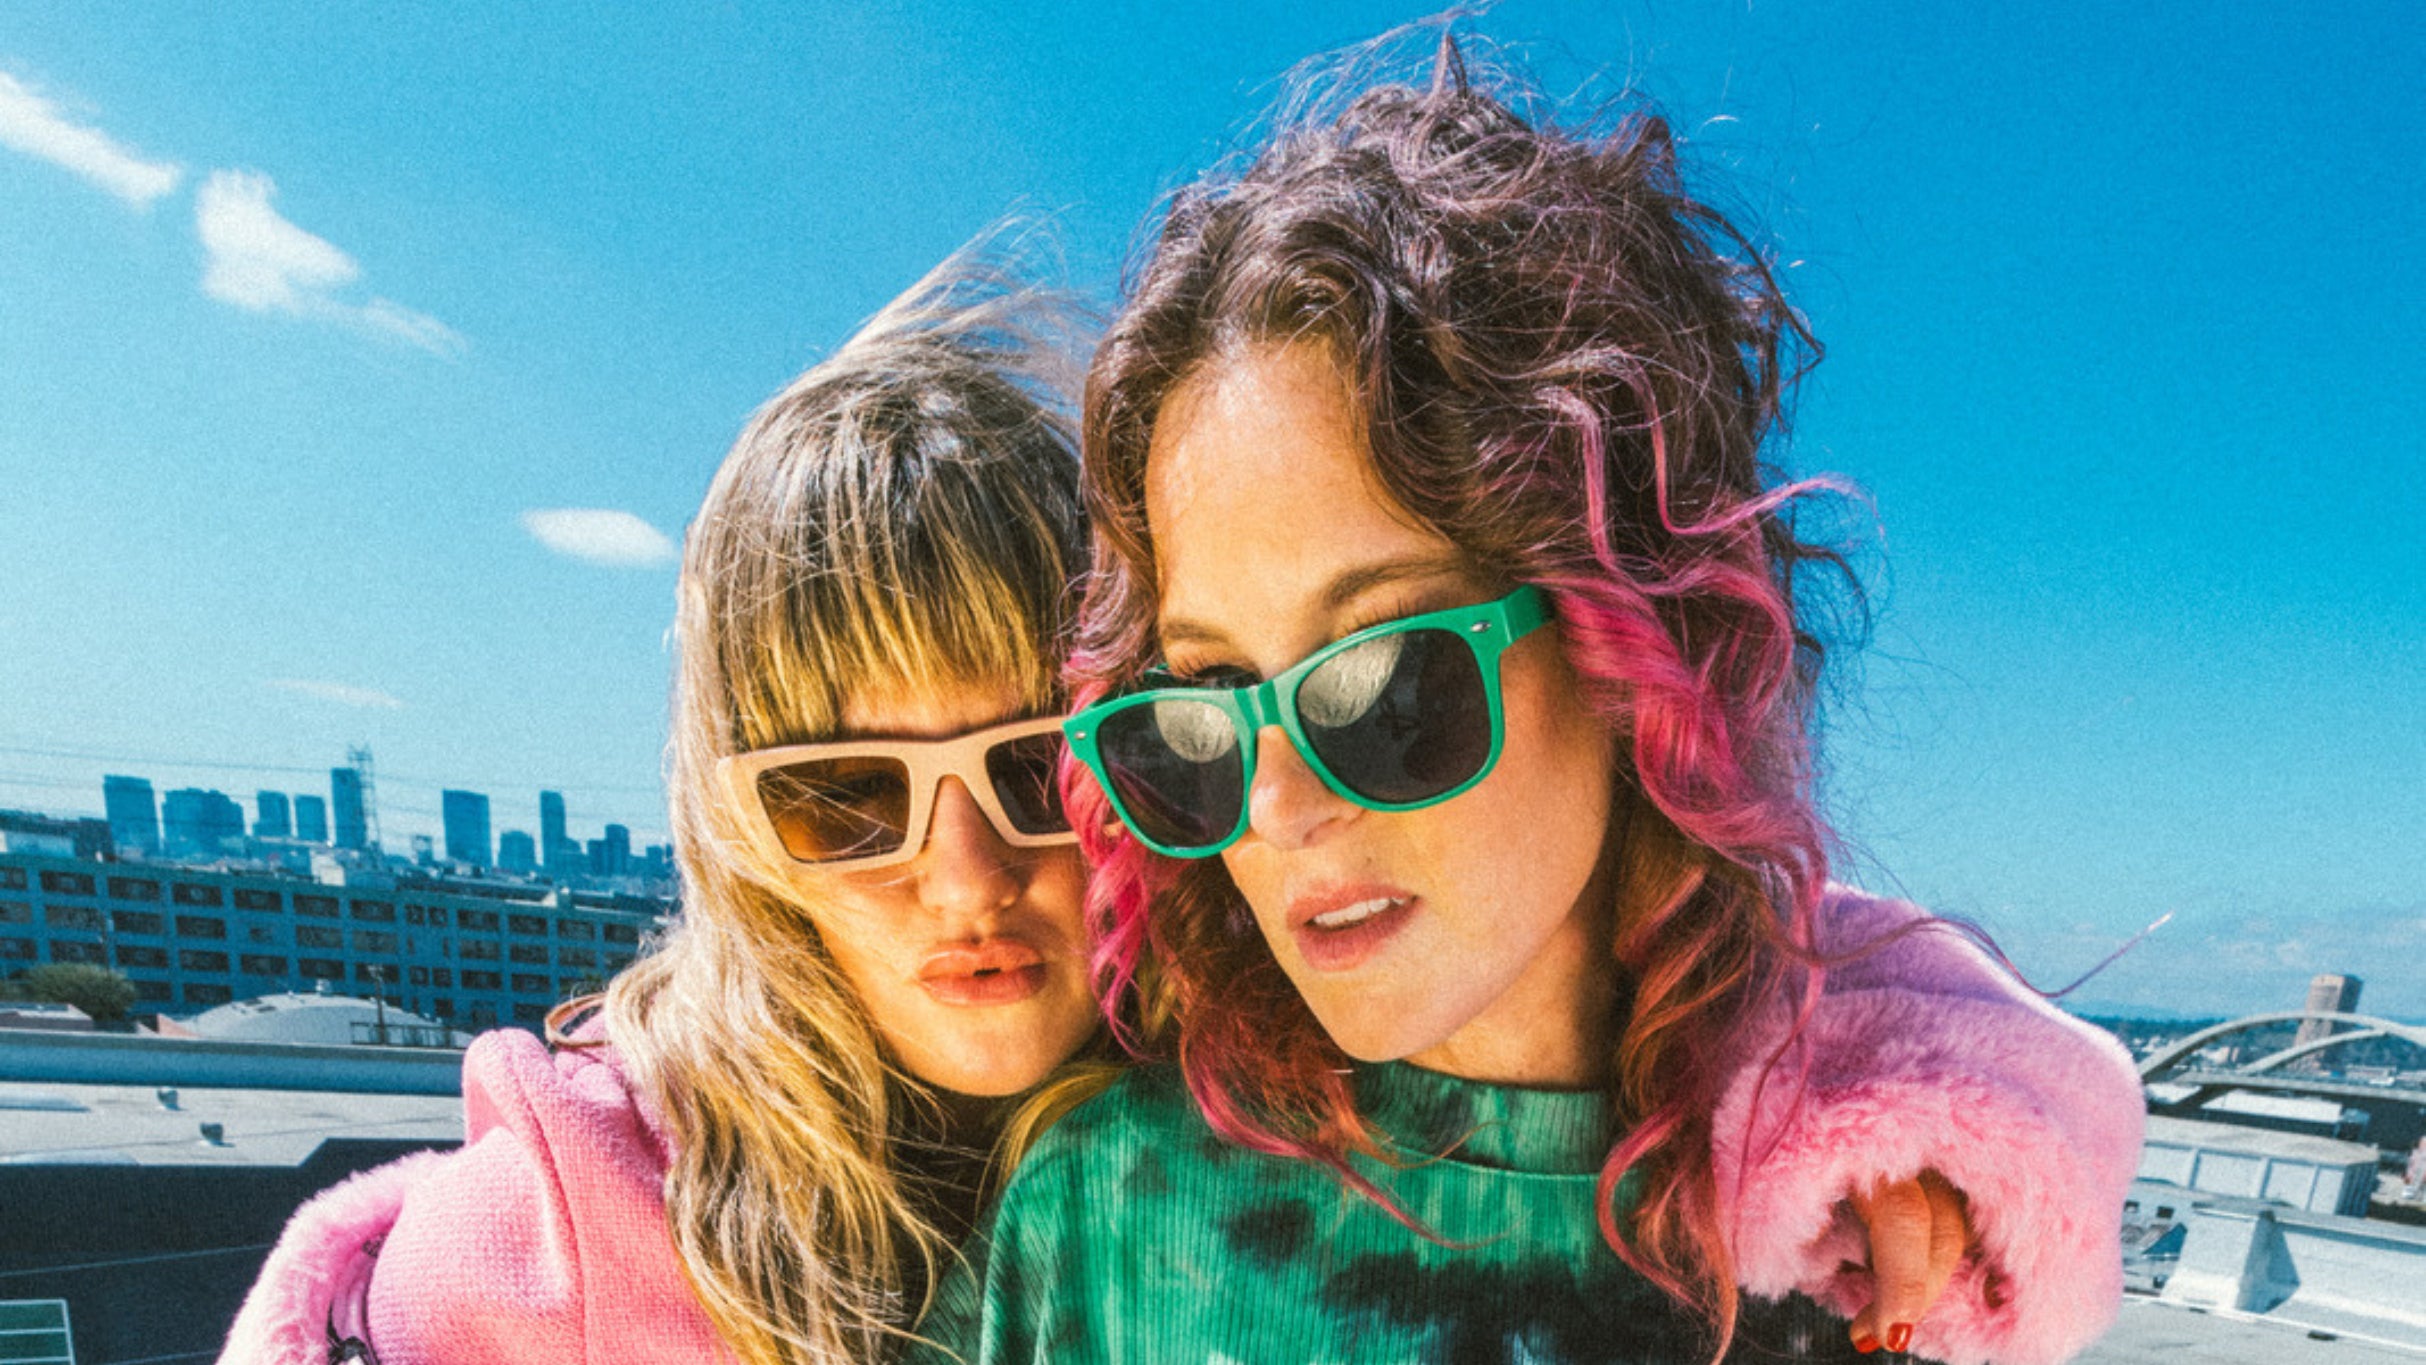 Deap Vally - Live For The Last Time free presale listing for show tickets in Seattle, WA (Neptune Theatre)